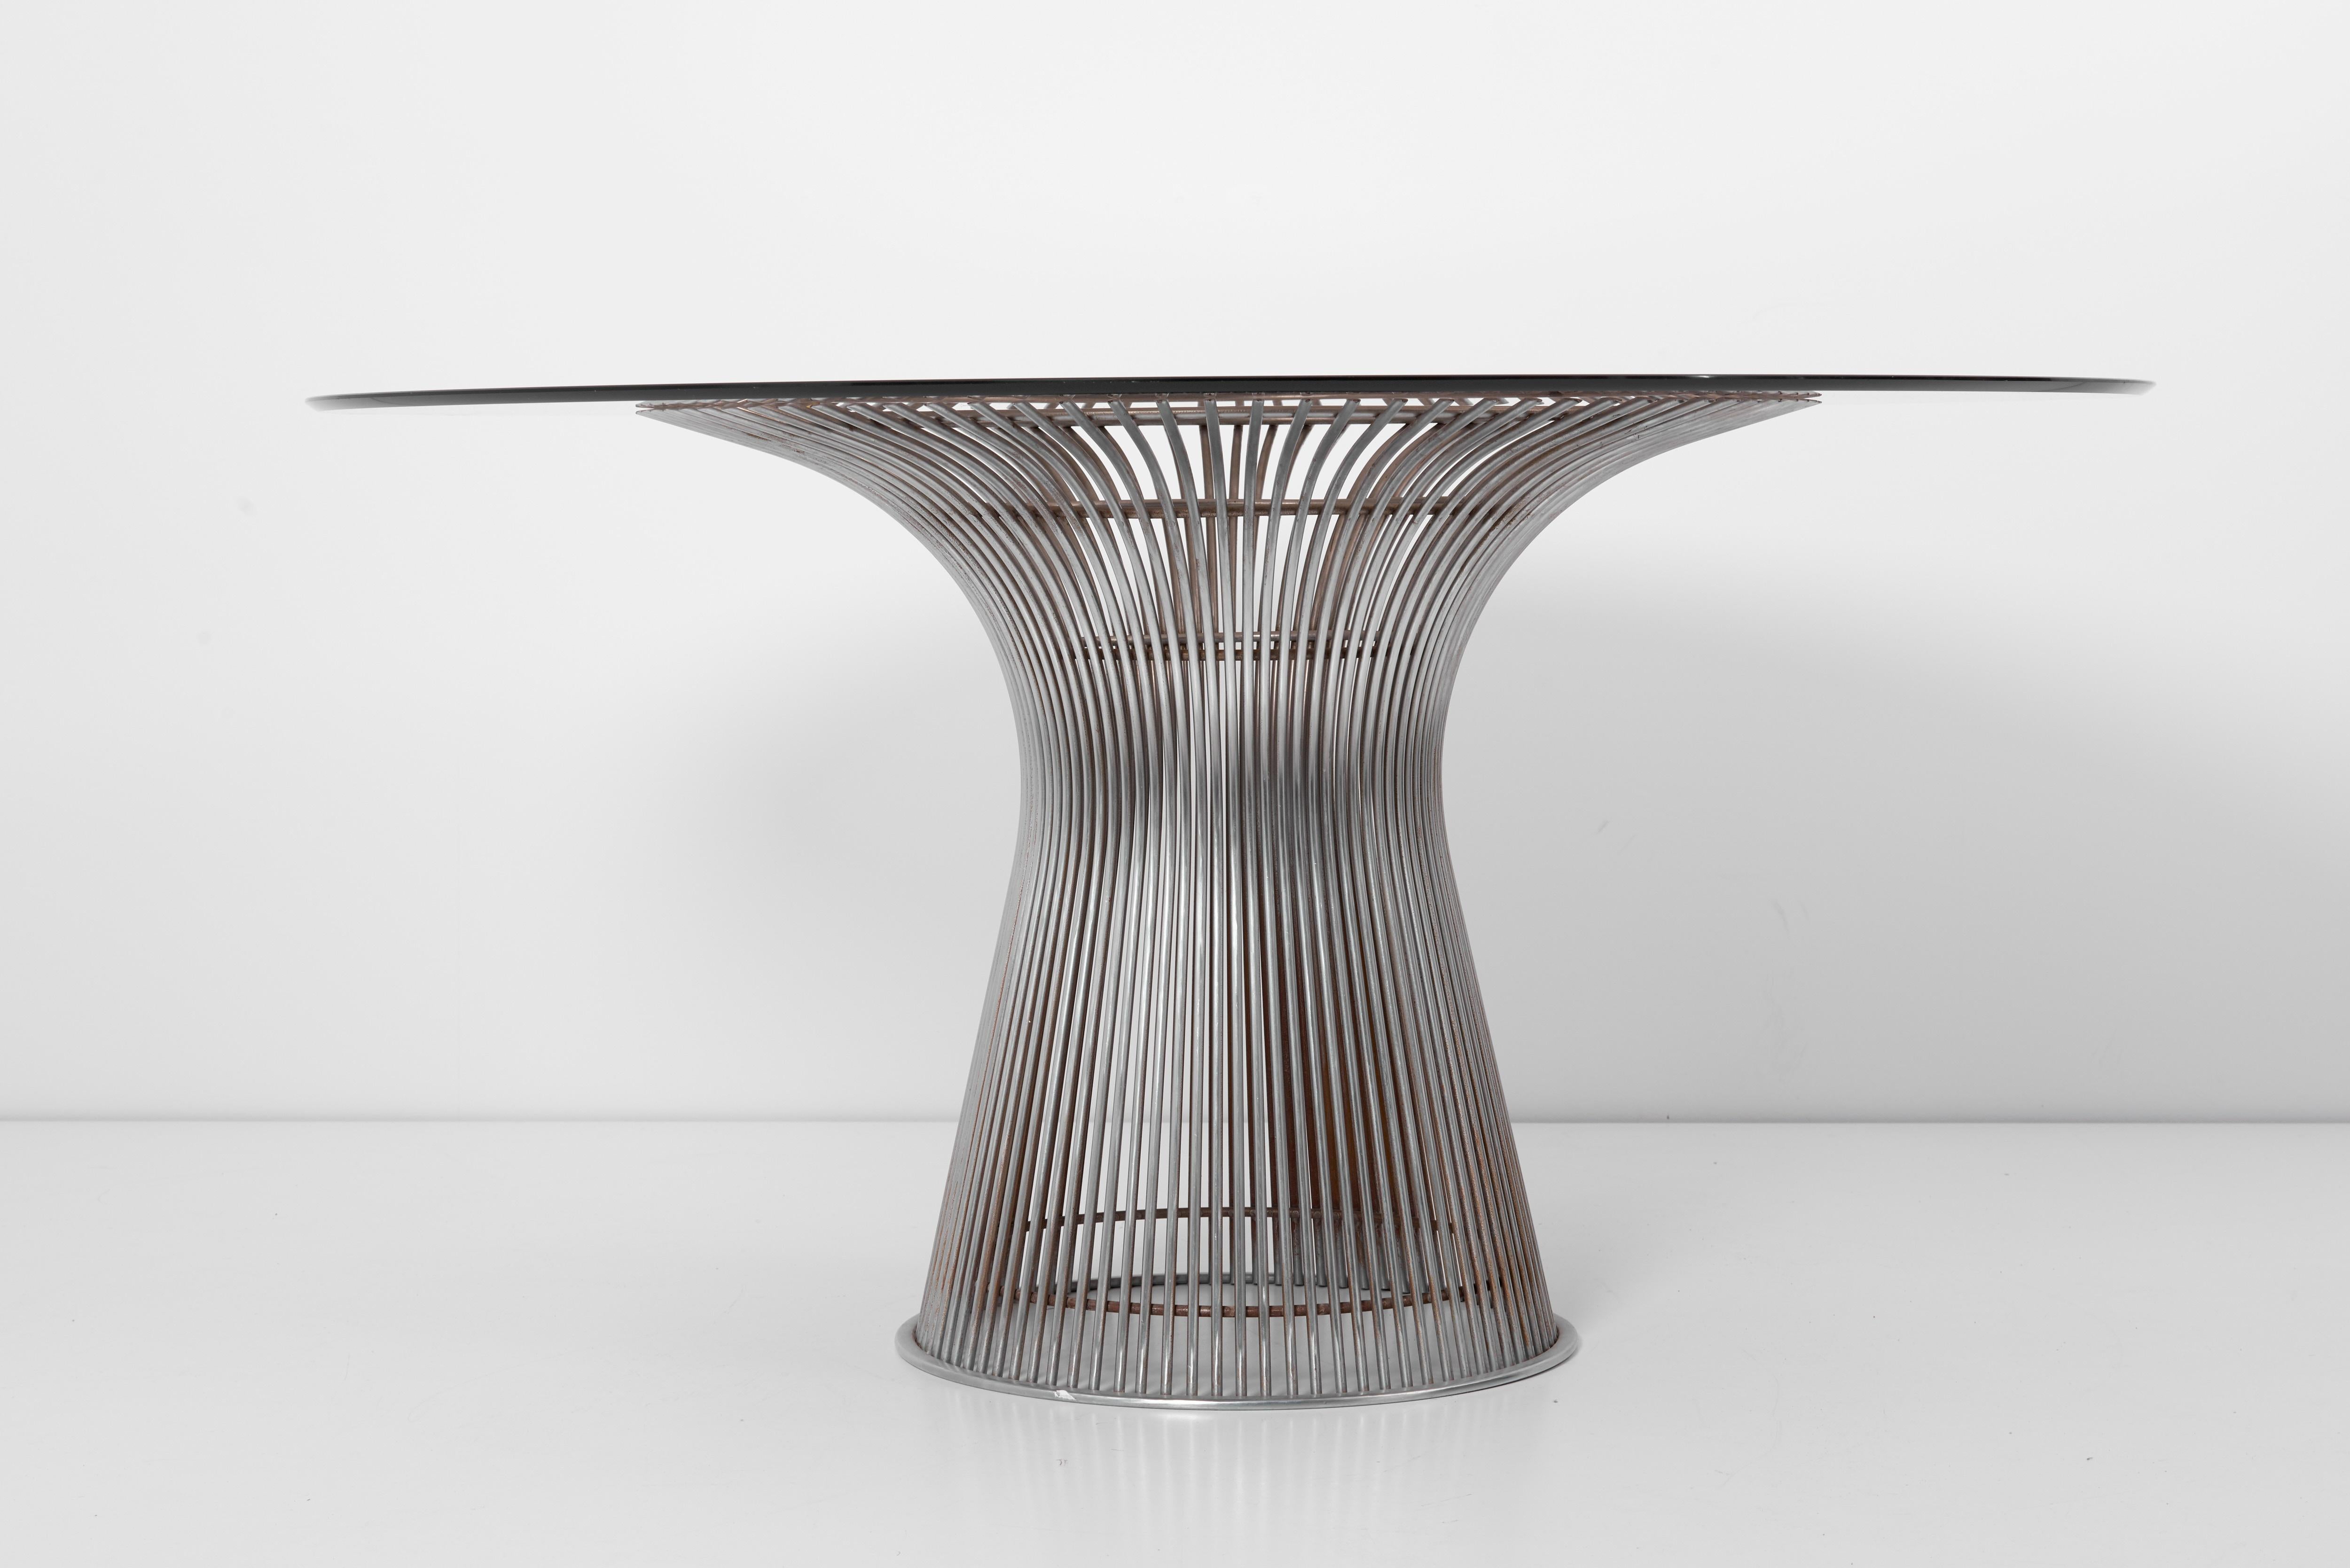 Mid-Century Modern Set of Wire Dining Table and Six Chairs by Warren Platner for Knoll, US - 1960s